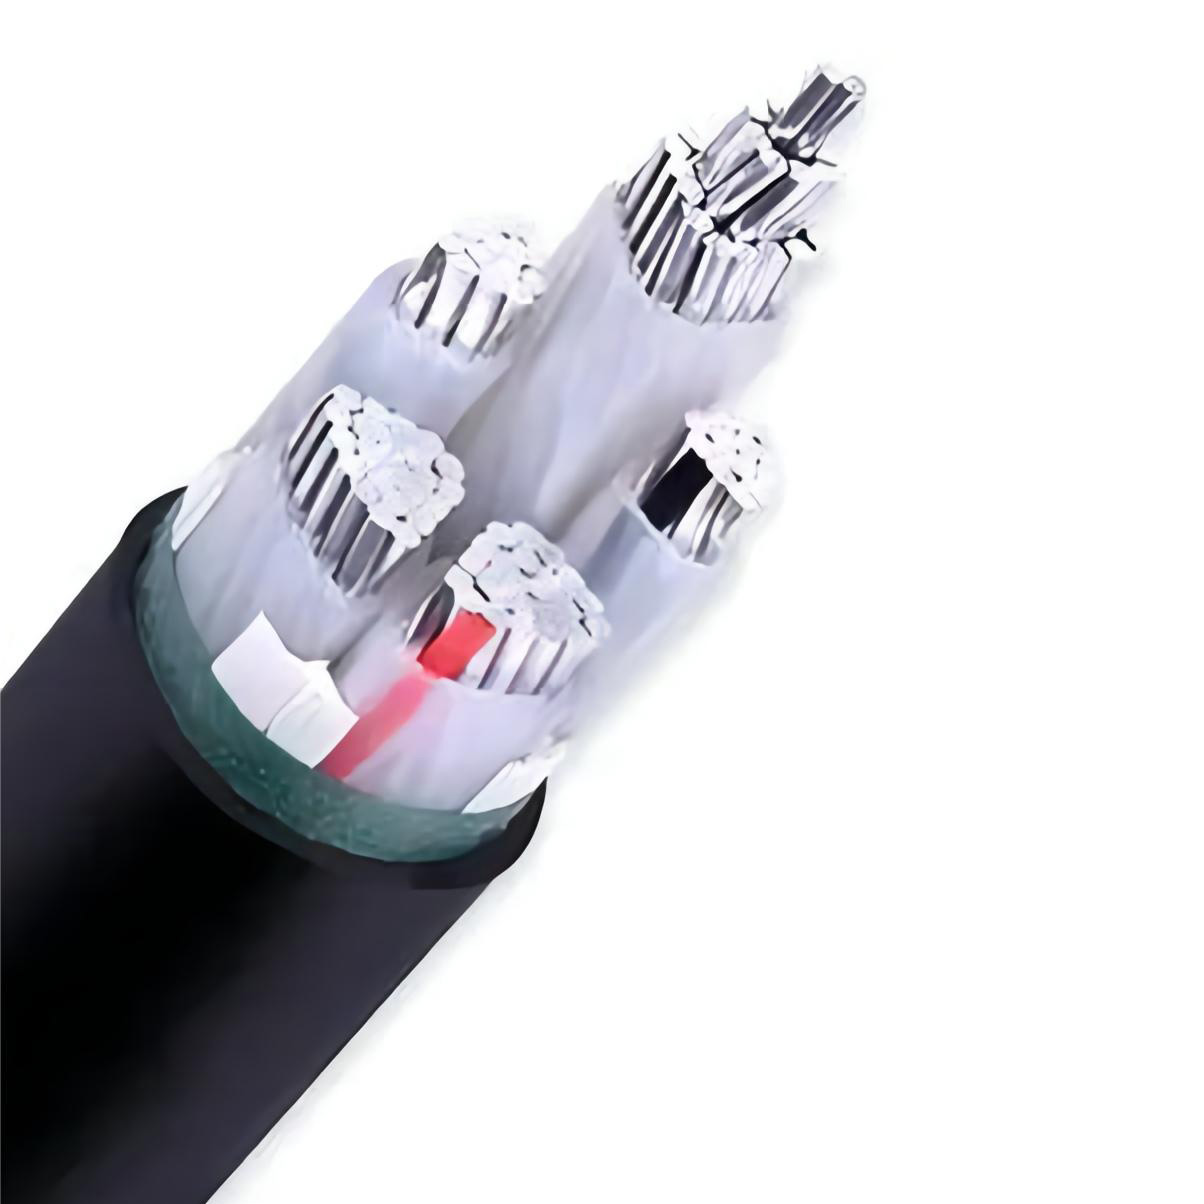 Low Voltage XLPE Power Cable Featured Image